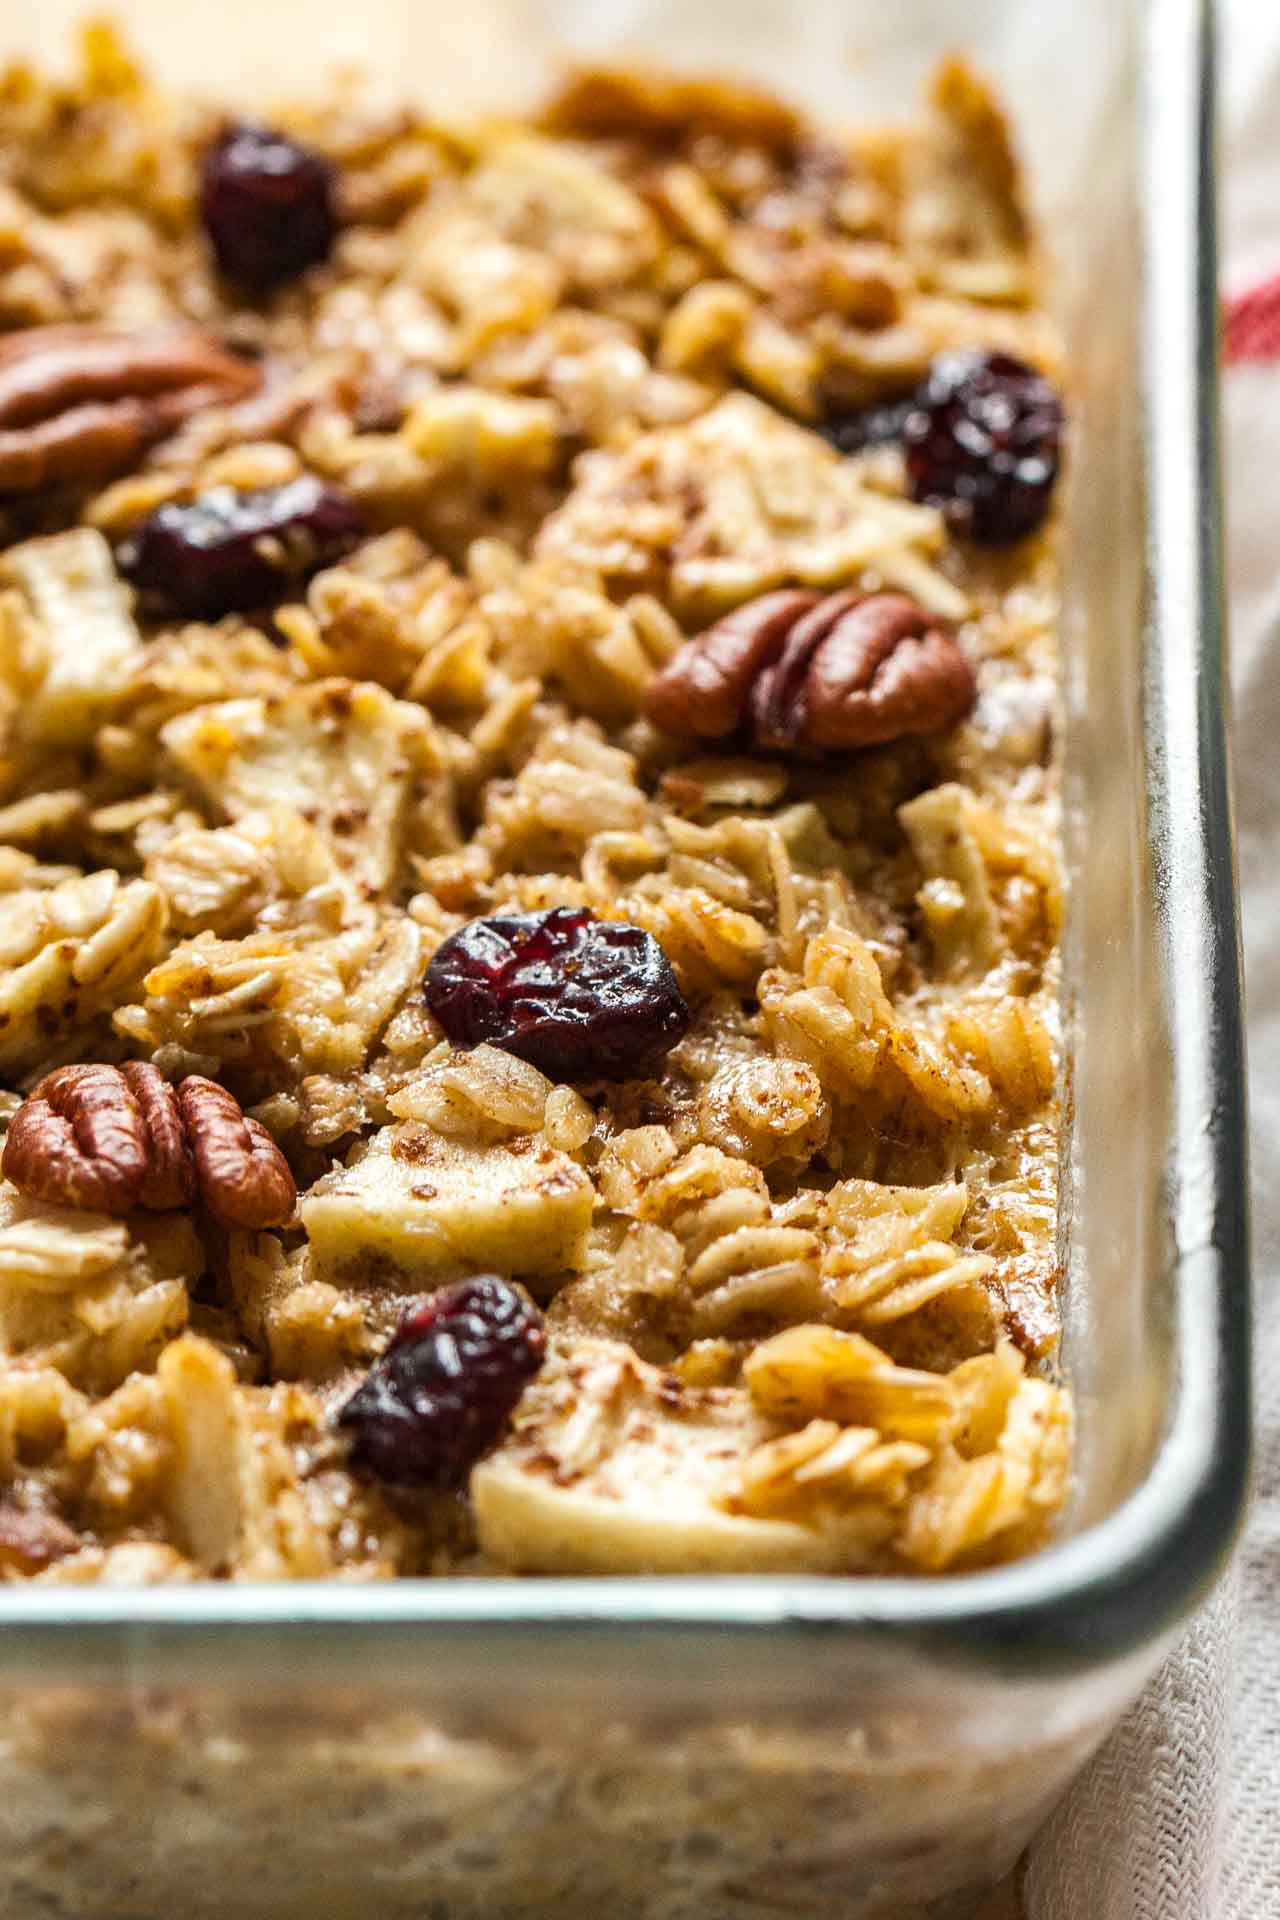 Close-up of a glass baking dish with baked oatmeal with apples, pecans and cranberries.